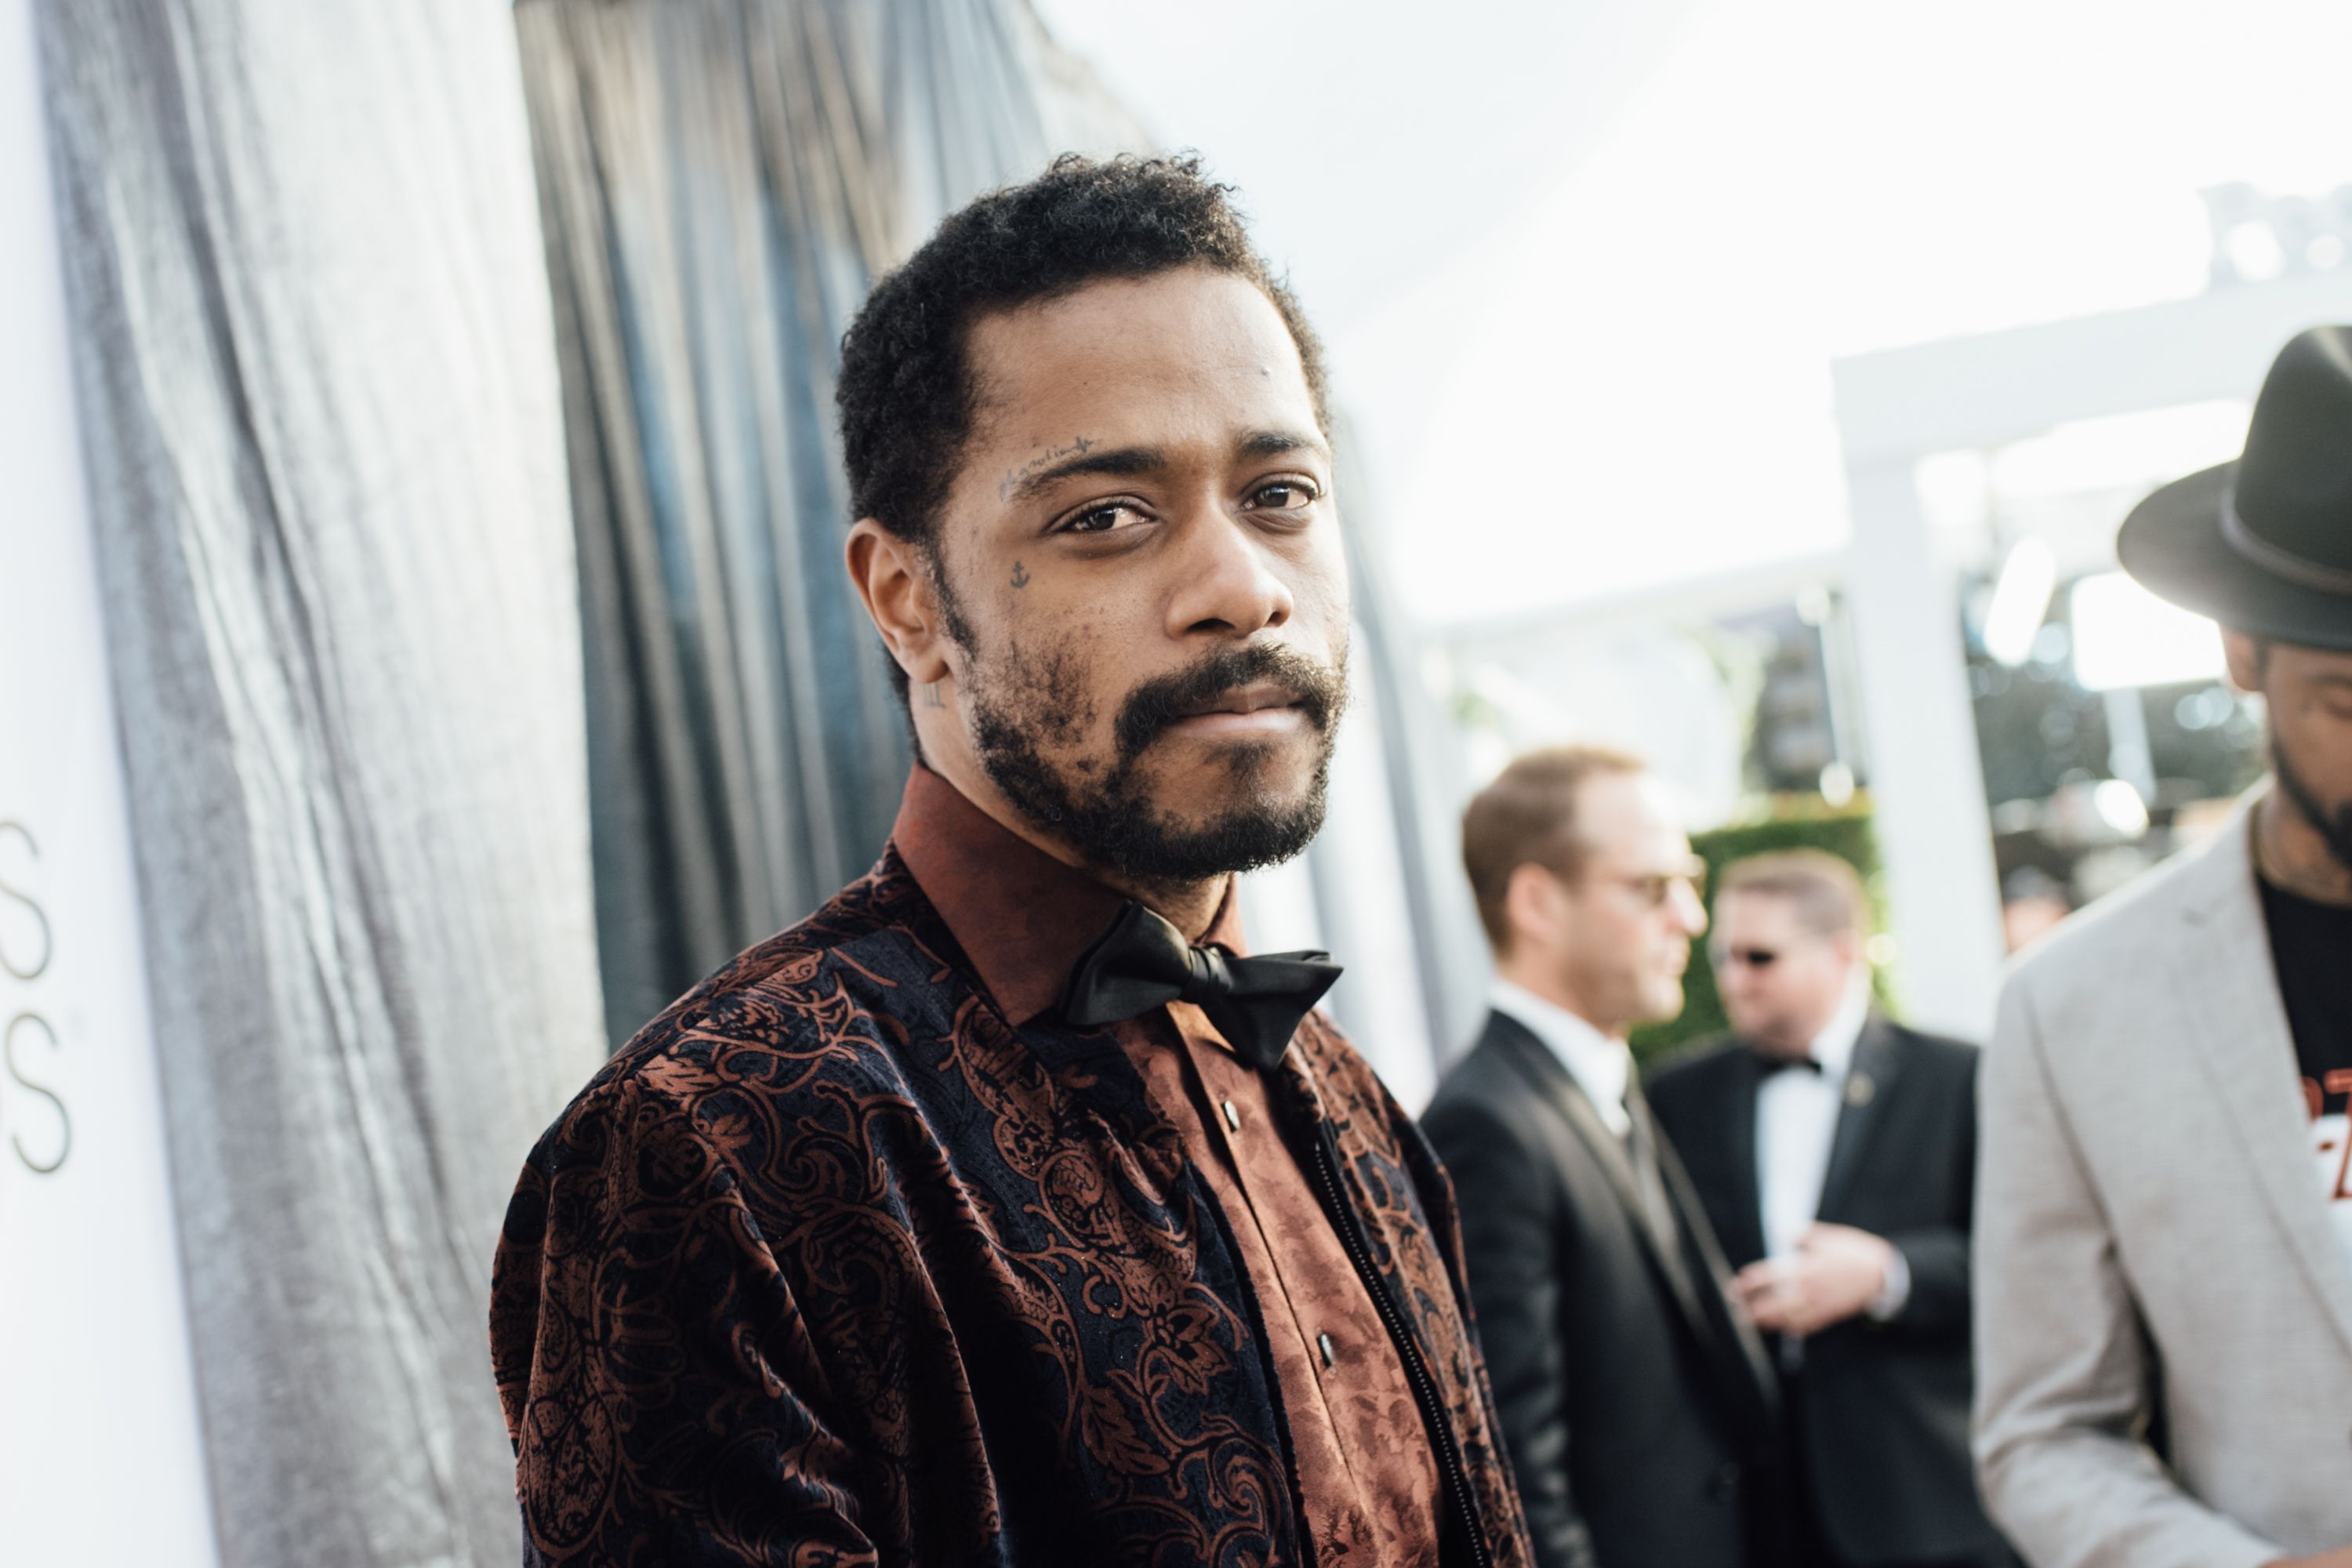  Lakeith Stanfield at the 25th annual Screen Actors Guild Awards in January 2019 in Los Angeles | Source: Getty Images